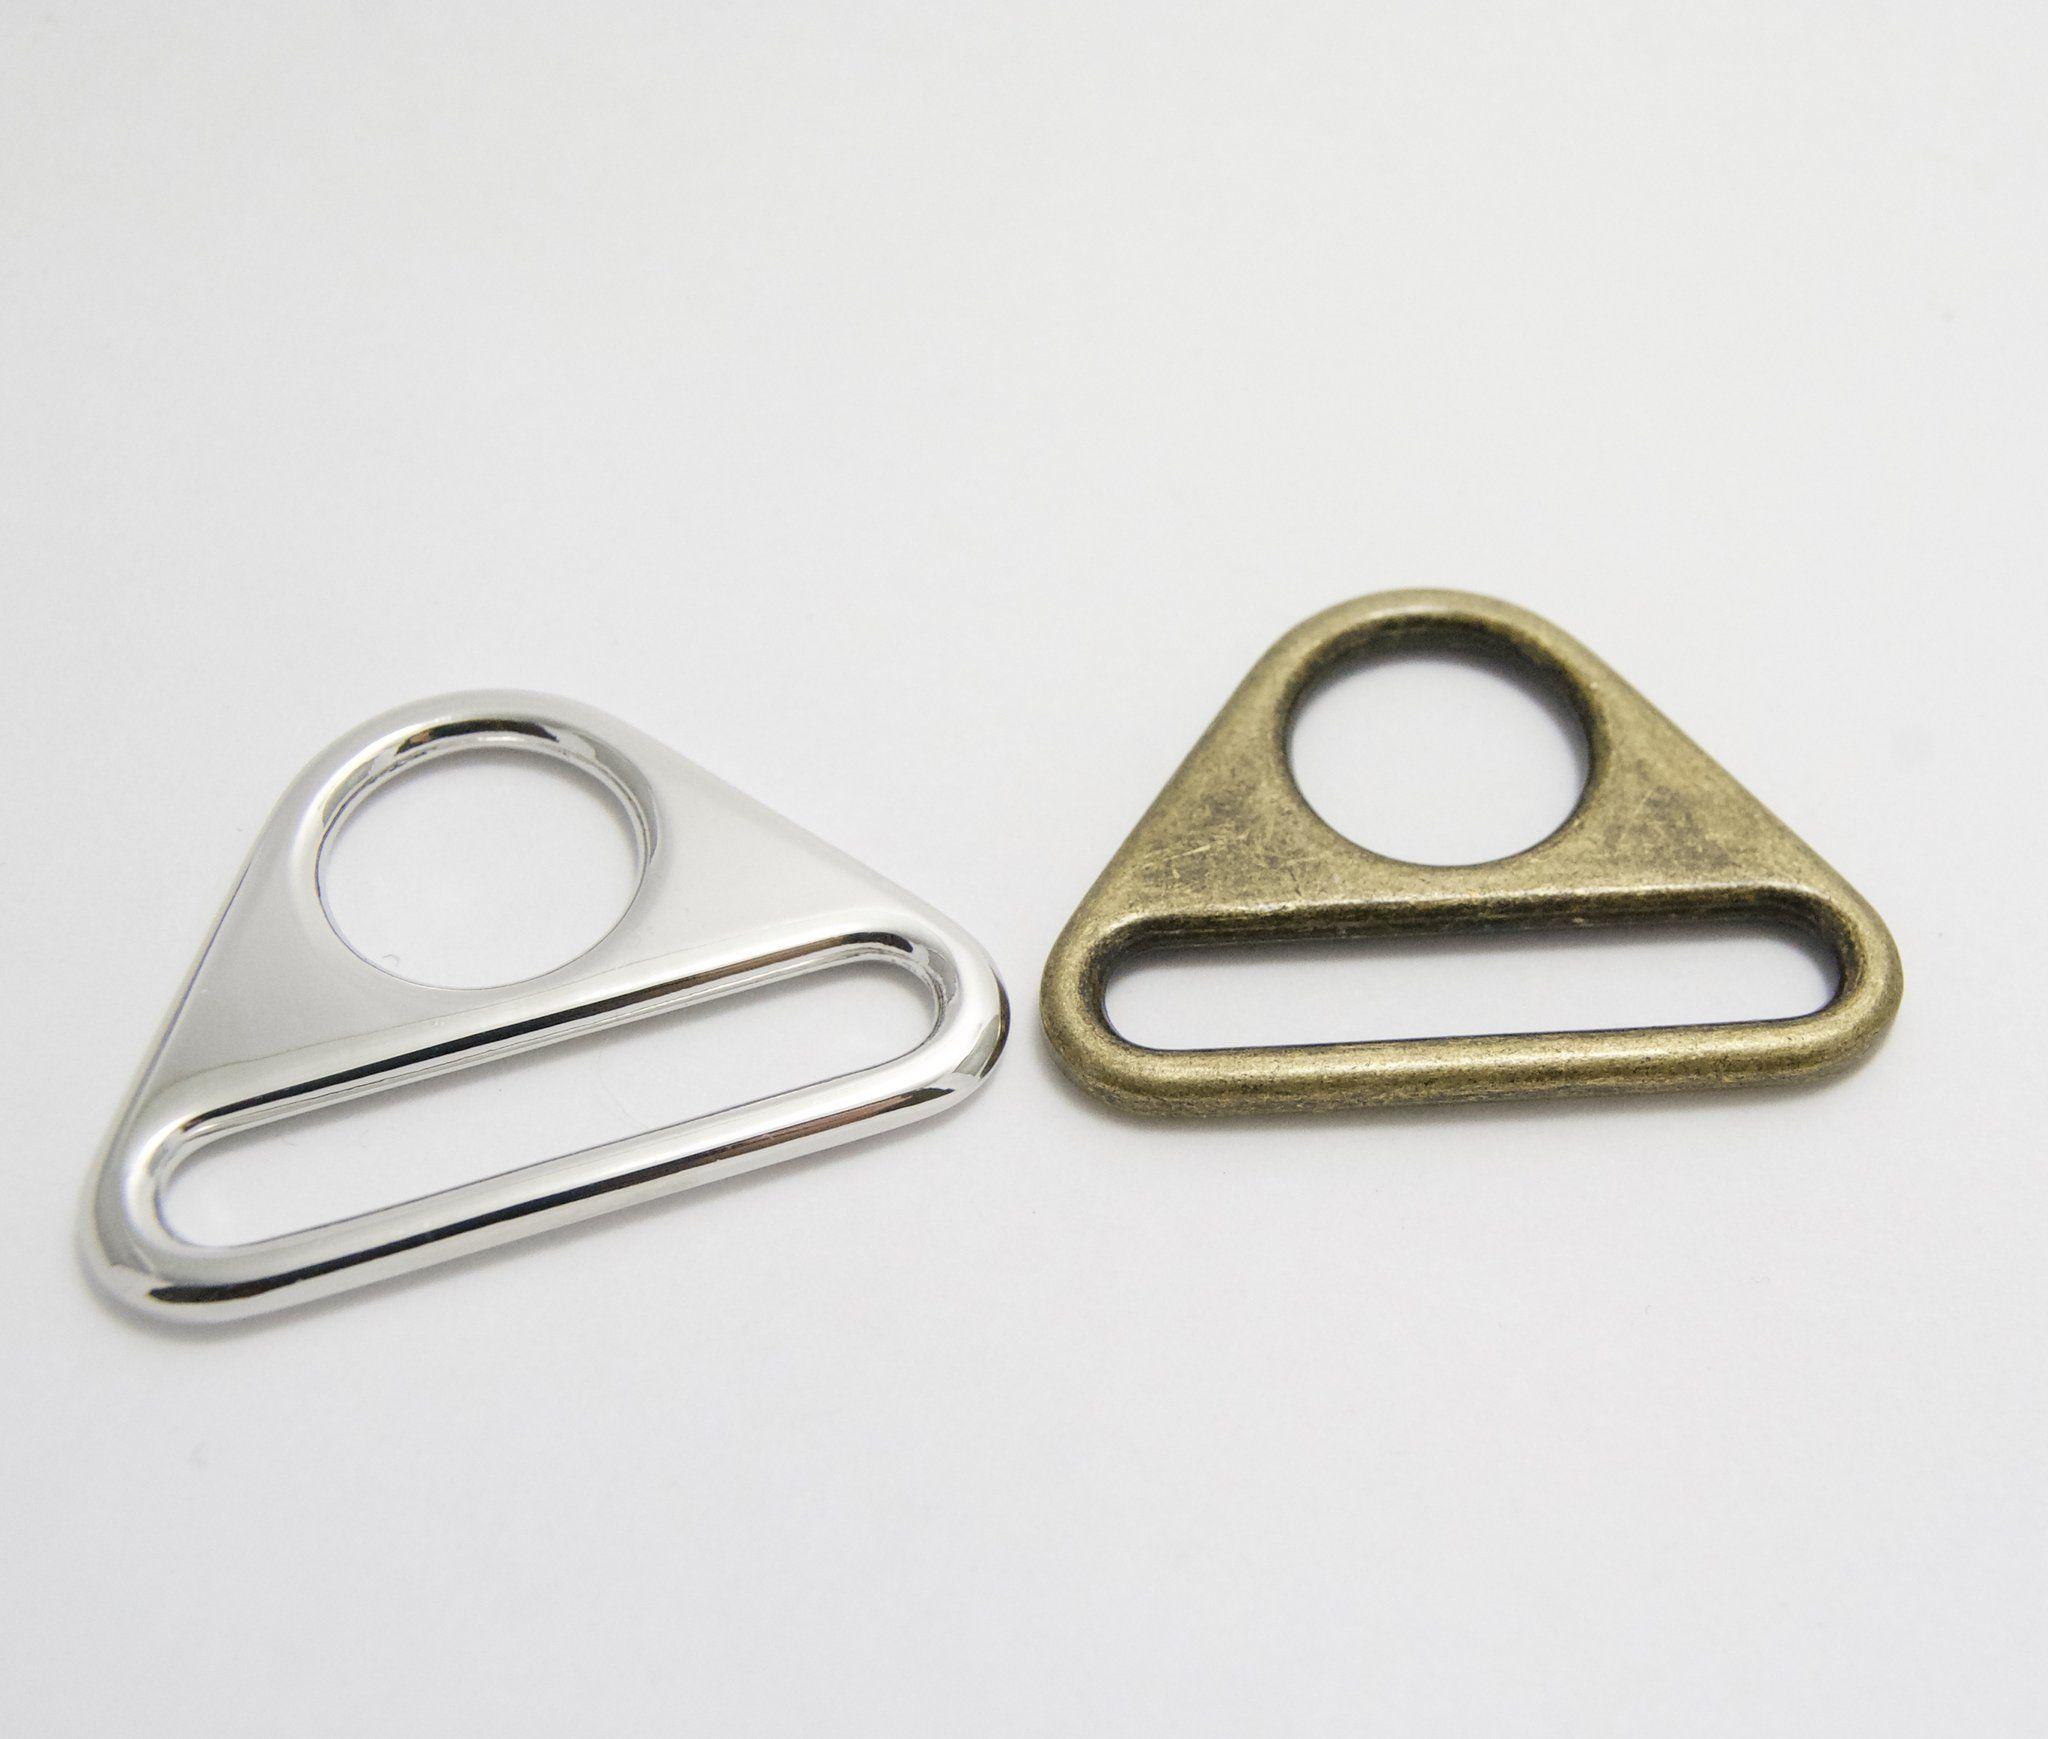 2 Silver Triangle Logo - 1.5 Triangle Rings in 2 colours, Antique Brass and Silver